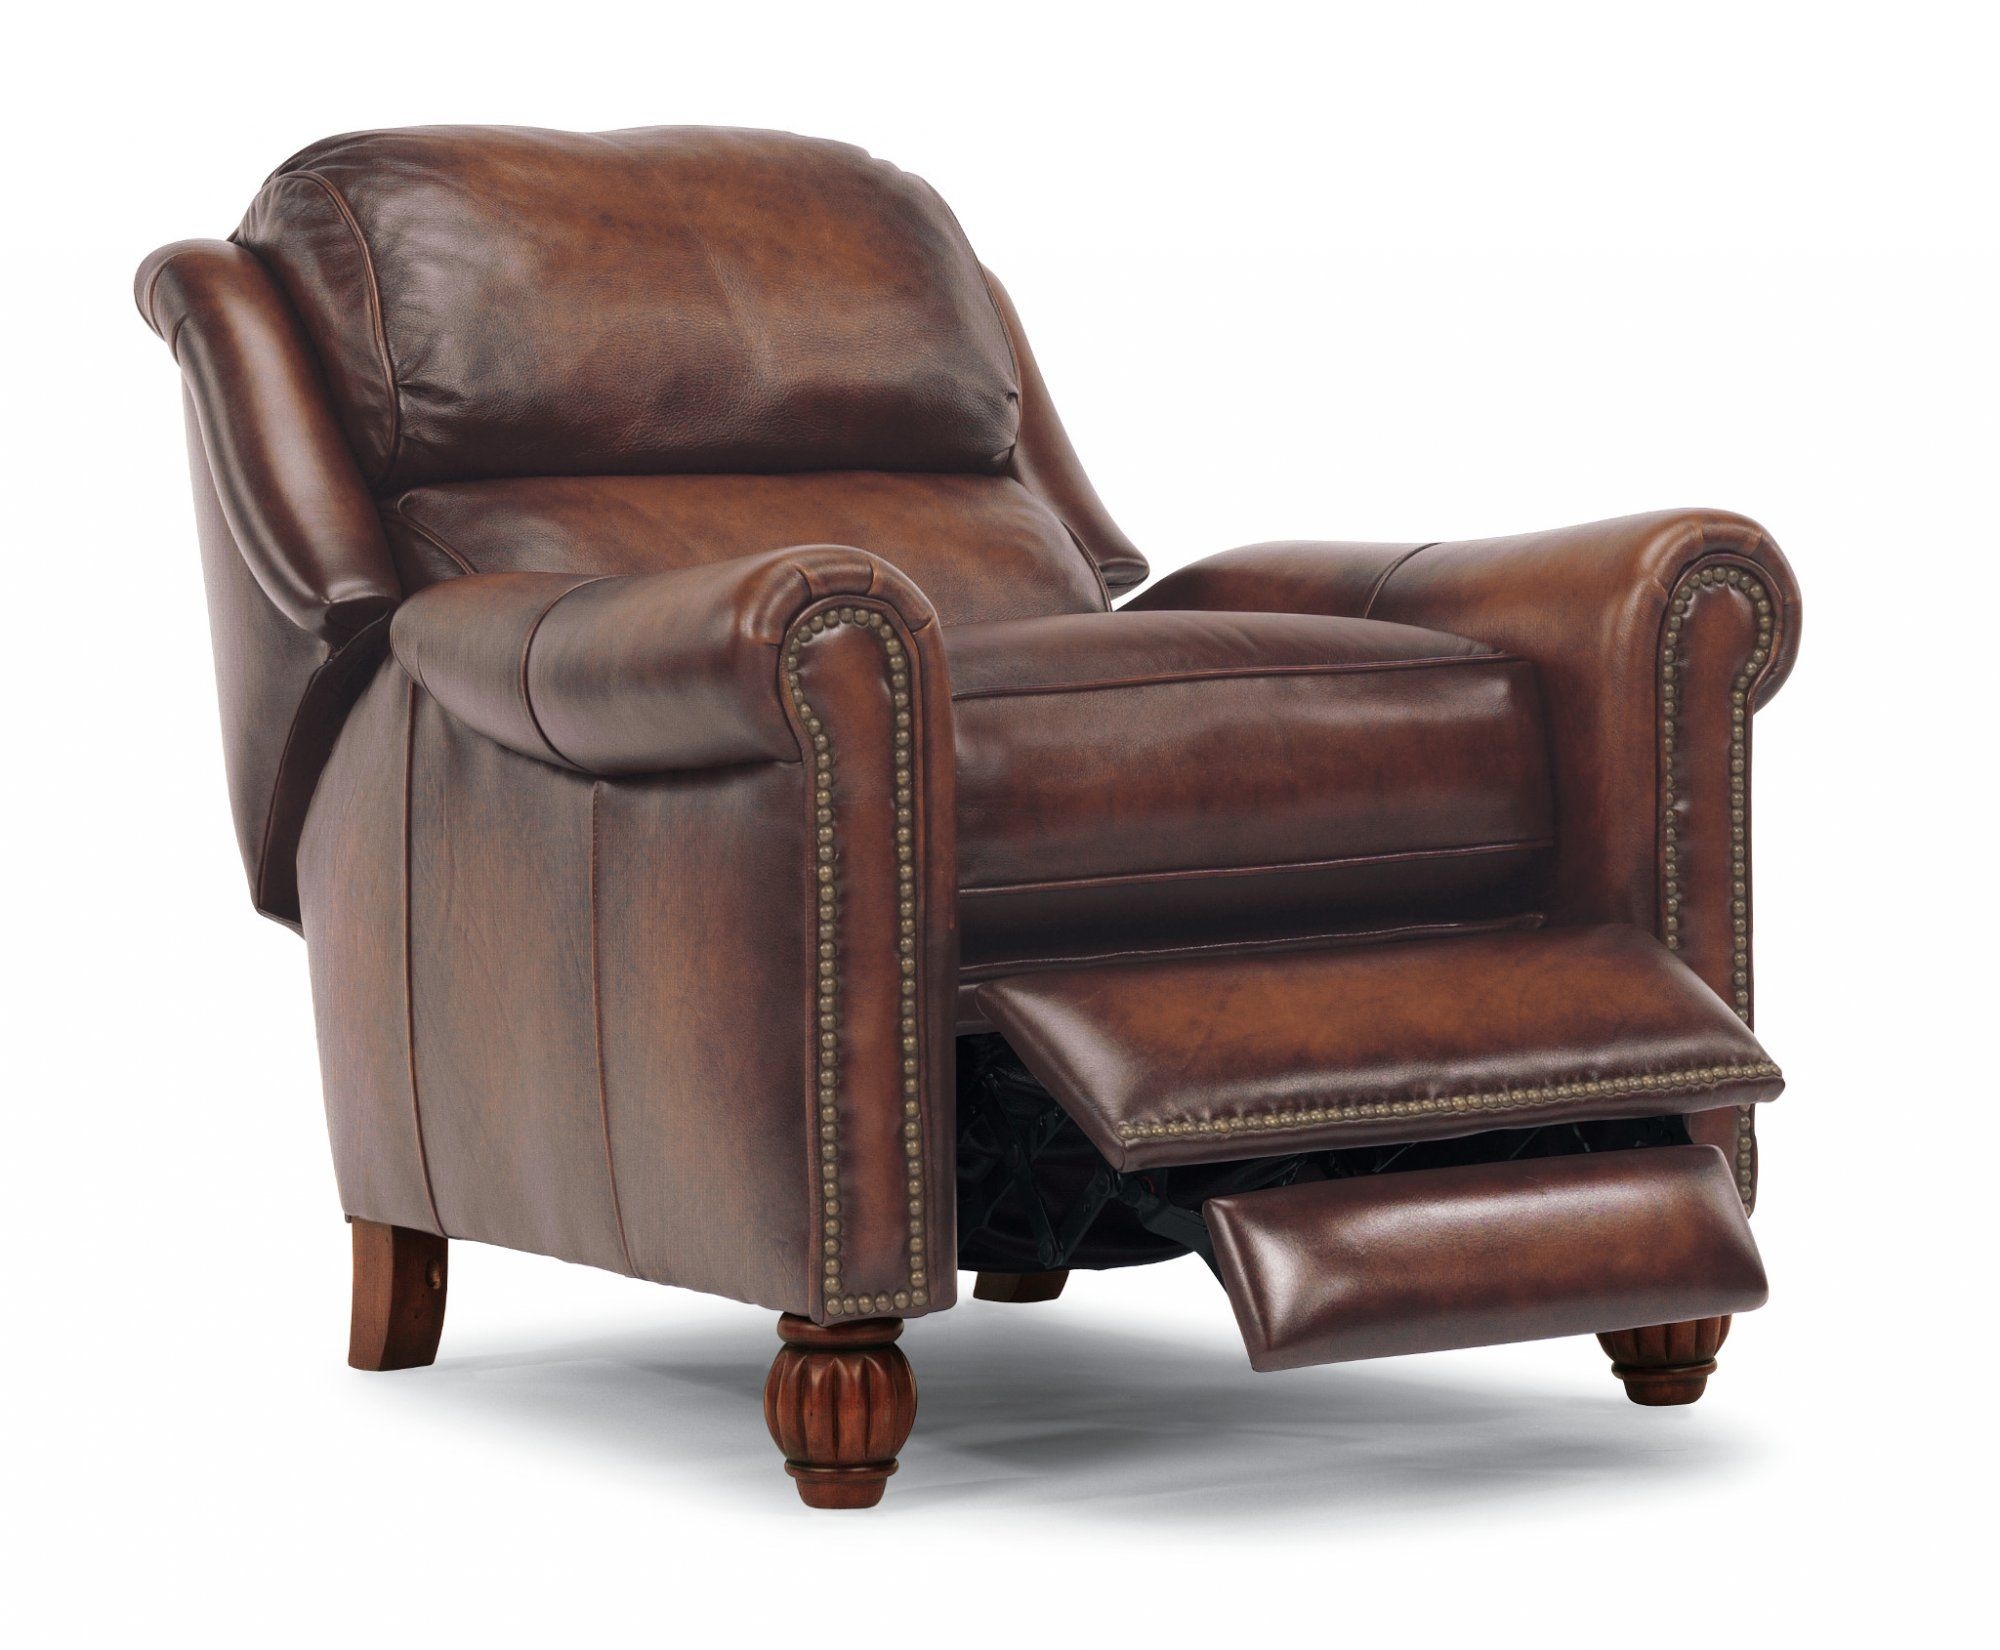 Recliners For Small Spaces Visualhunt, Small Leather Swivel Chairs